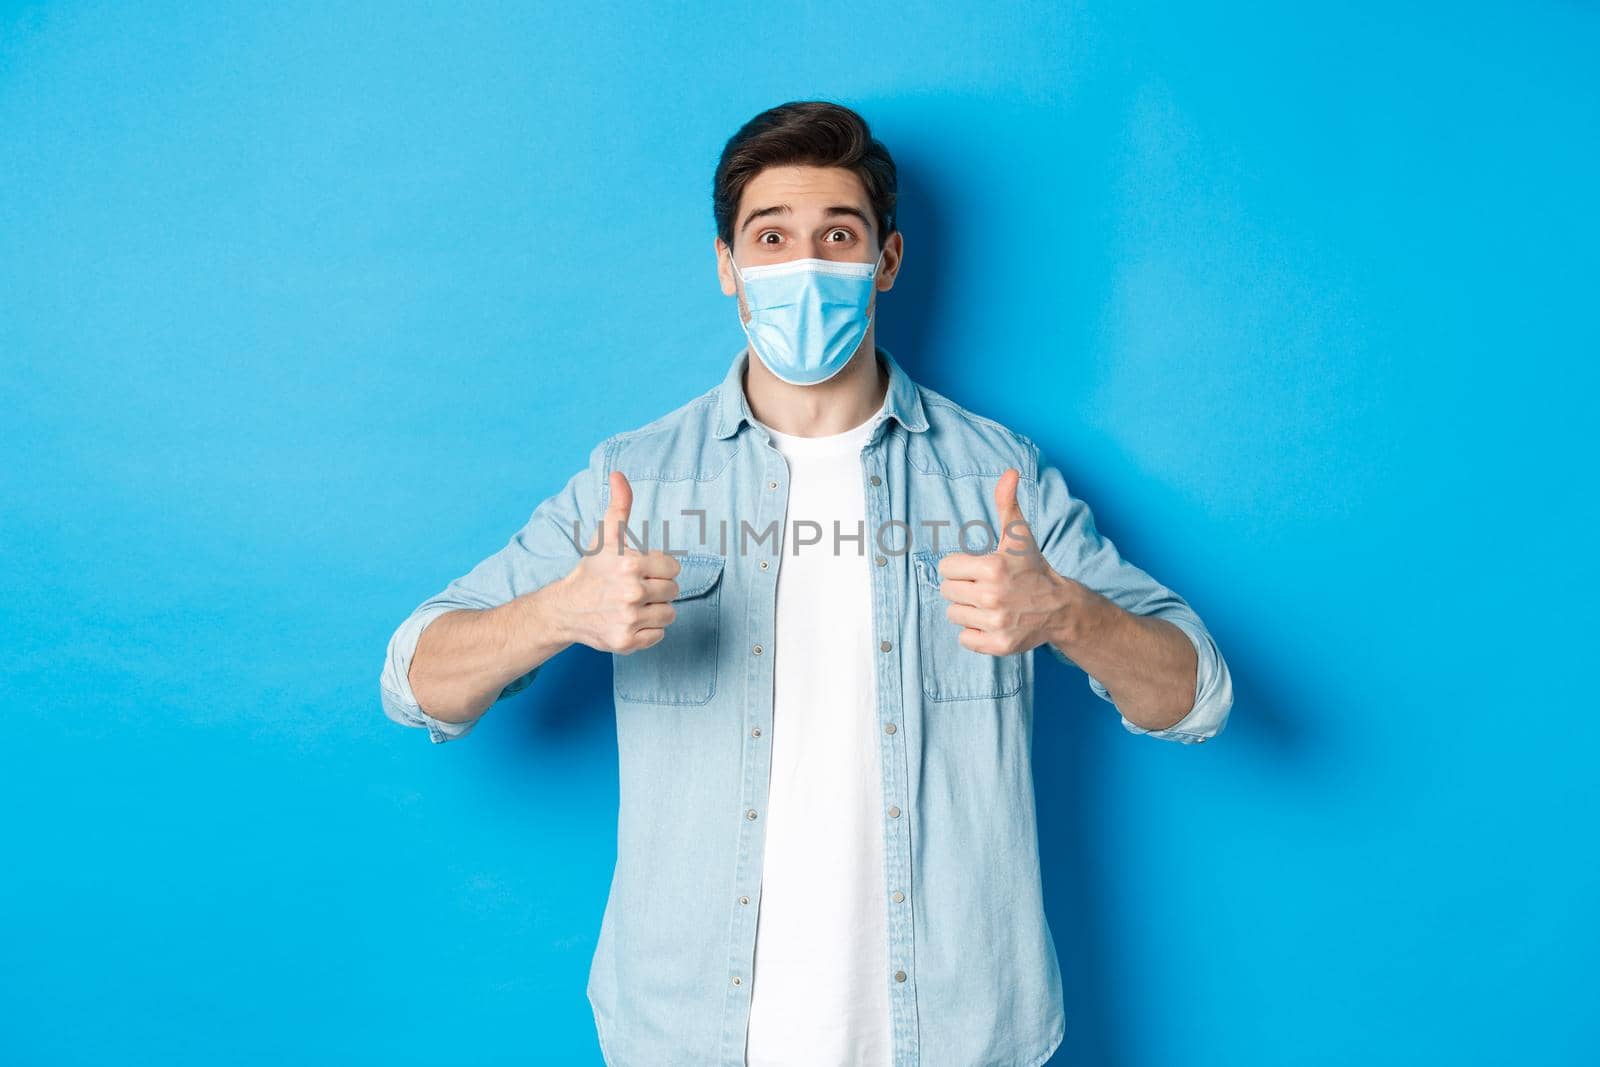 Concept of covid-19, pandemic and social distancing. Amazed guy in medical mask showing thumbs-up, recommending promo offer, standing against blue background.